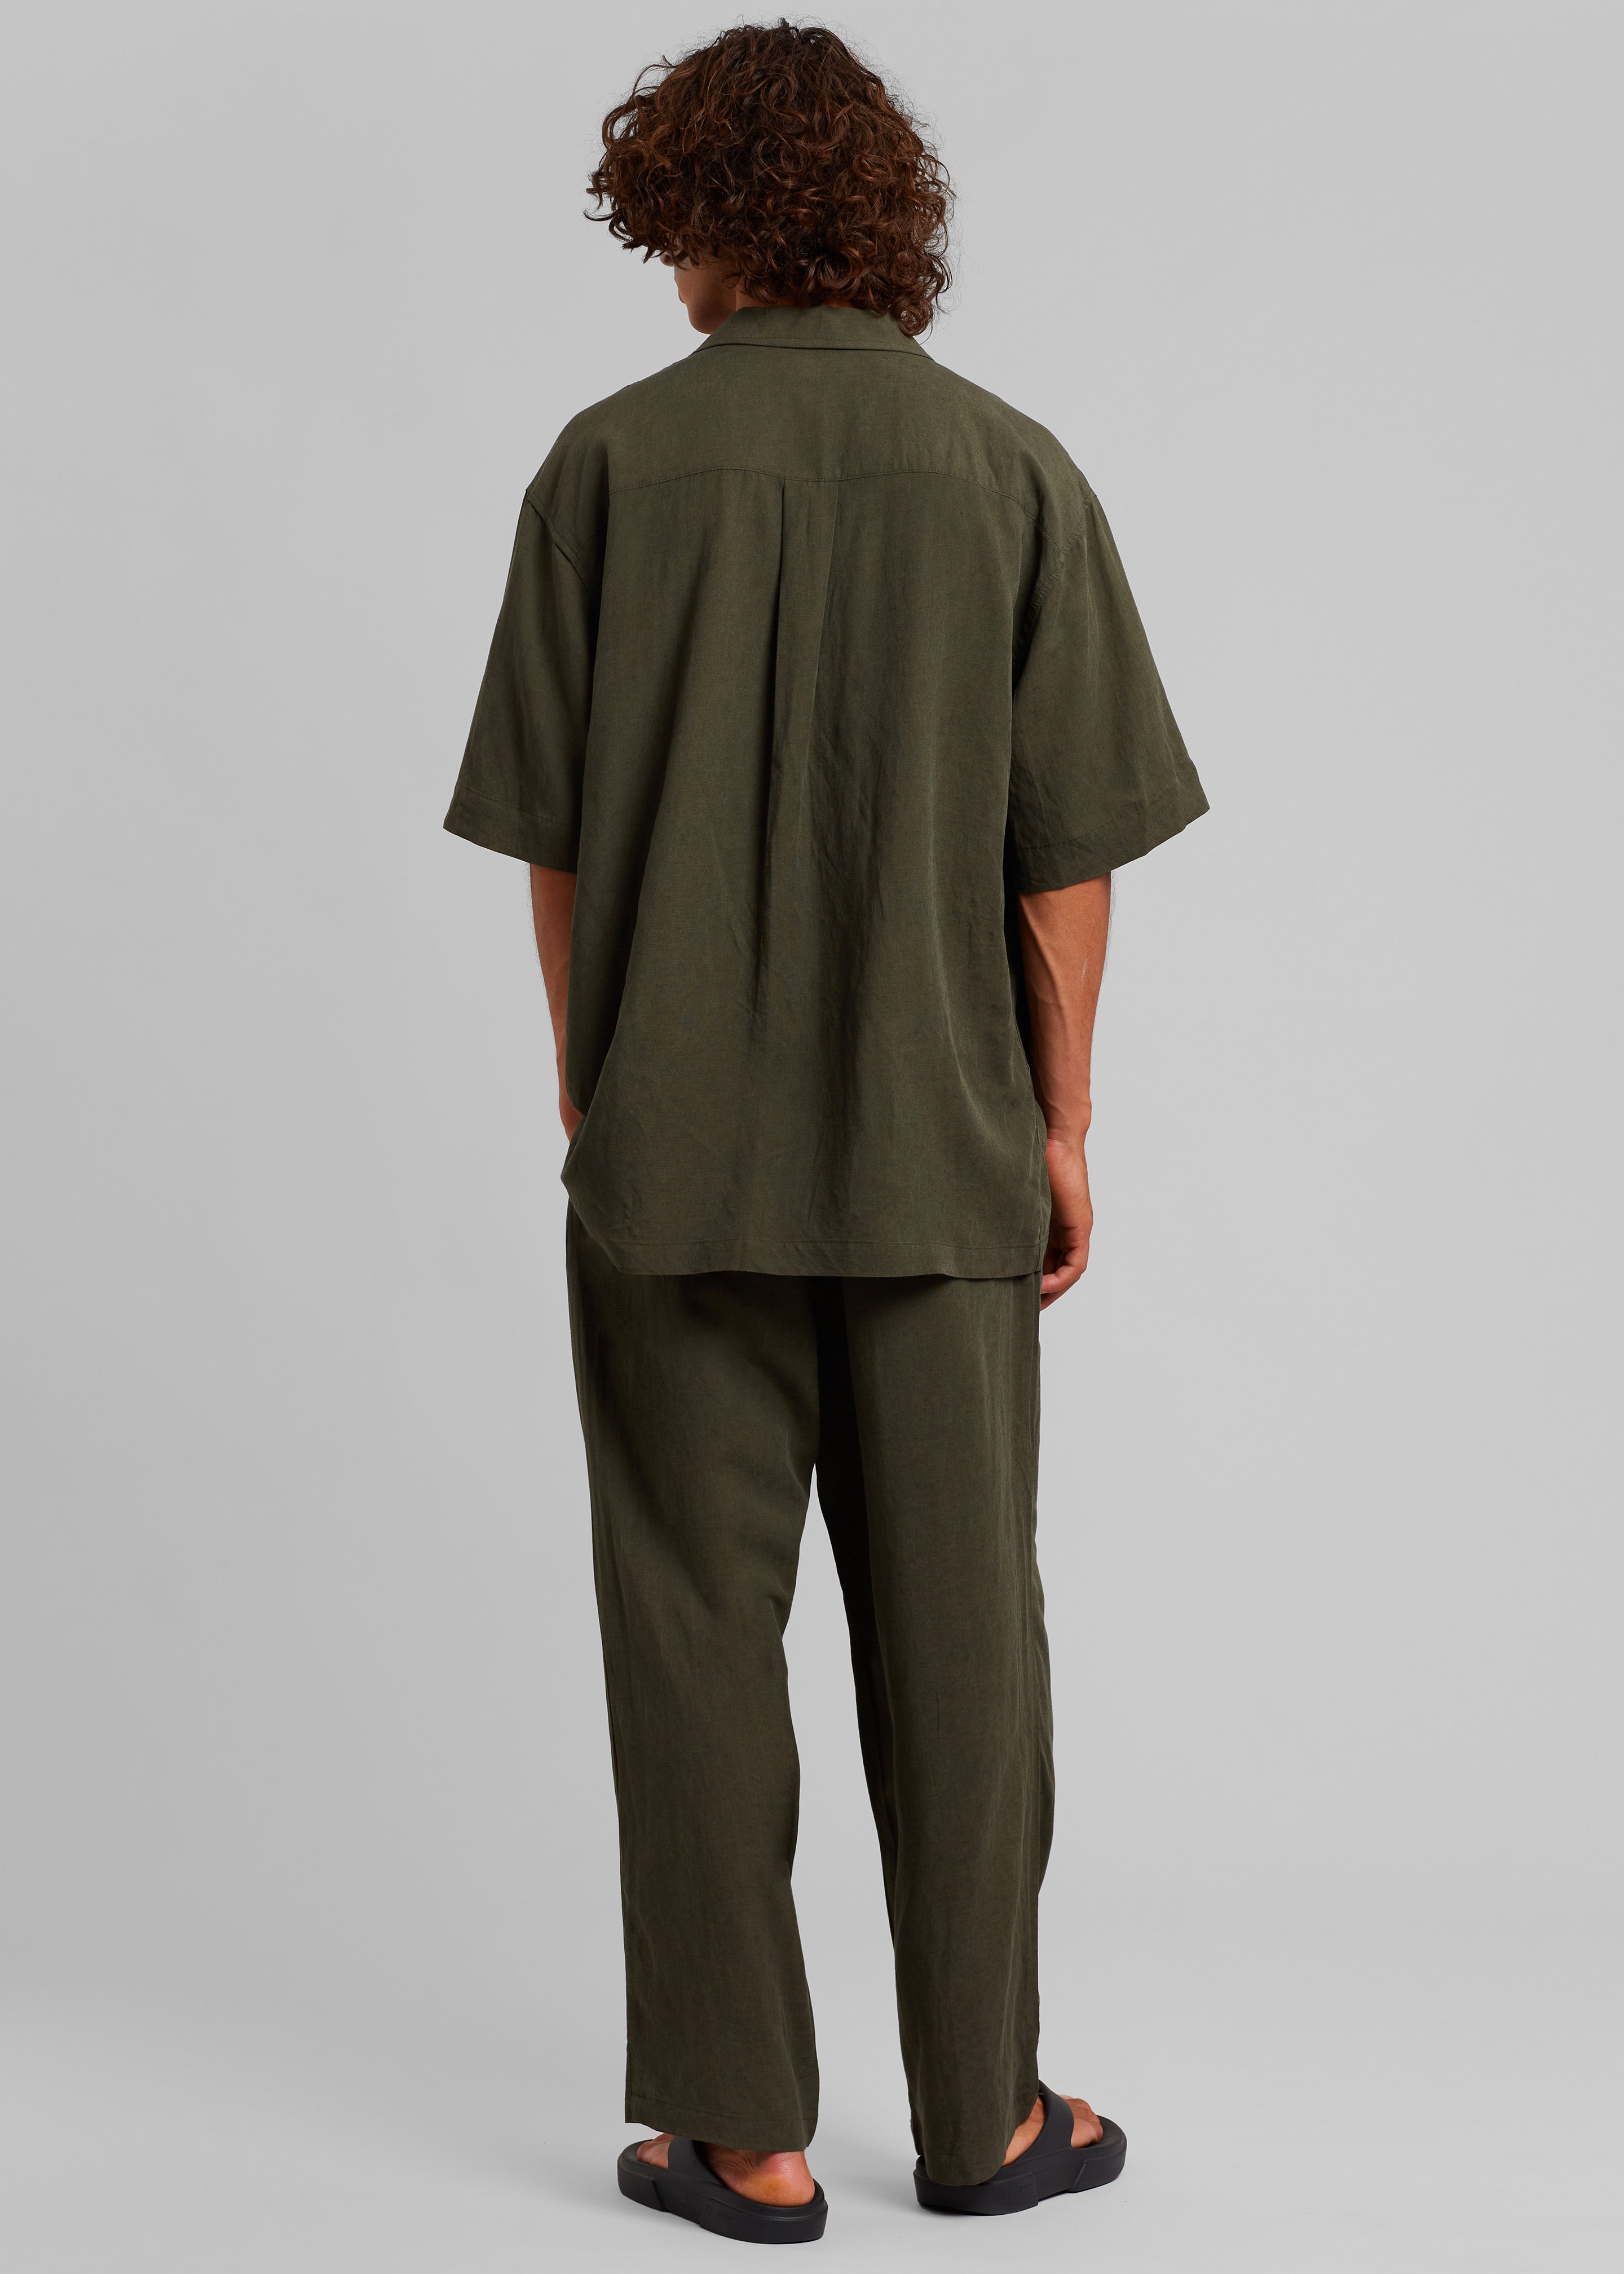 Georg Puch Pants - Olive - 8